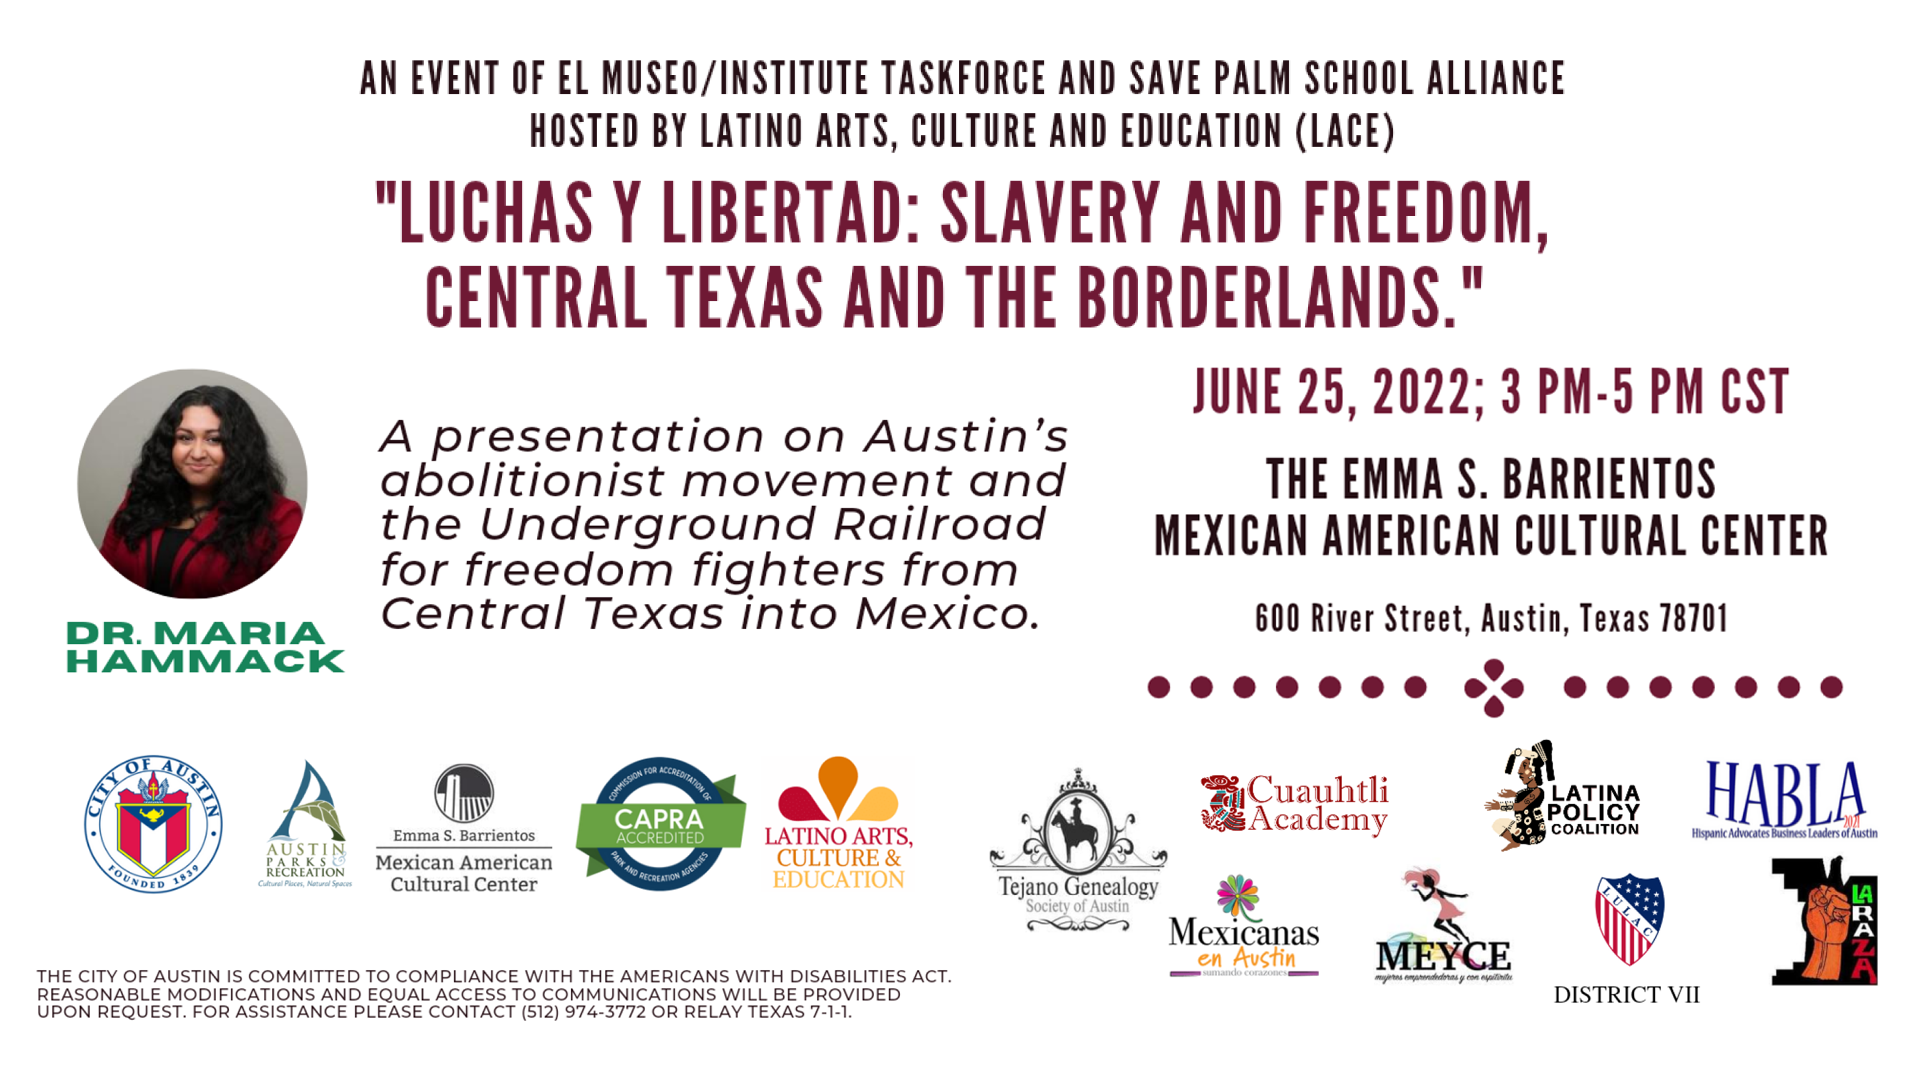 LUCHAS Y LIBERTAD SLAVERY AND FREEDOM, CENTRAL TEXAS AND THE BORDERLANDS Saturday June 25th 3pm to 5pm